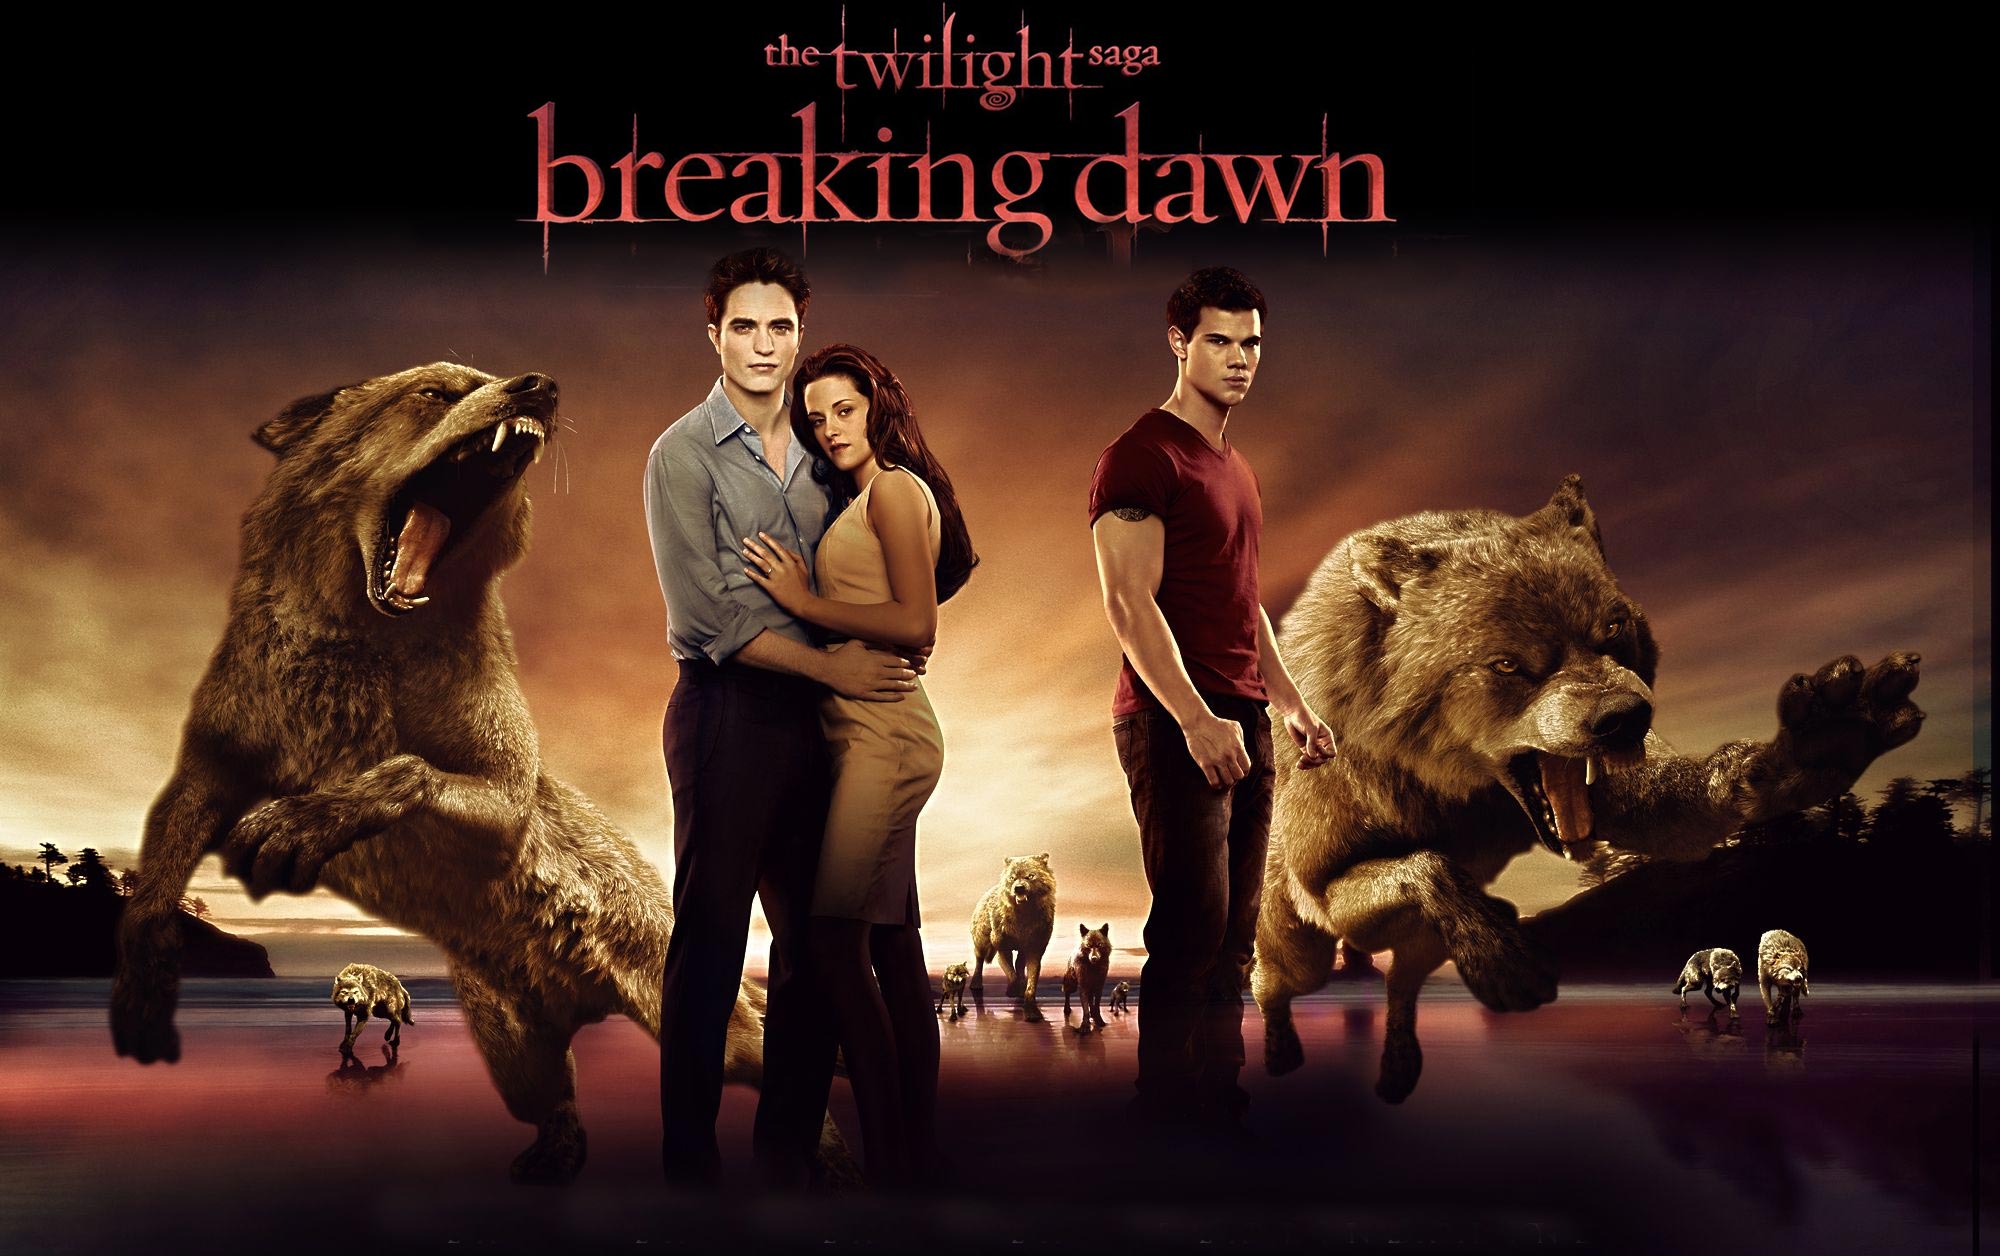 twilight saga breaking dawn part 1 extended edition download torrent